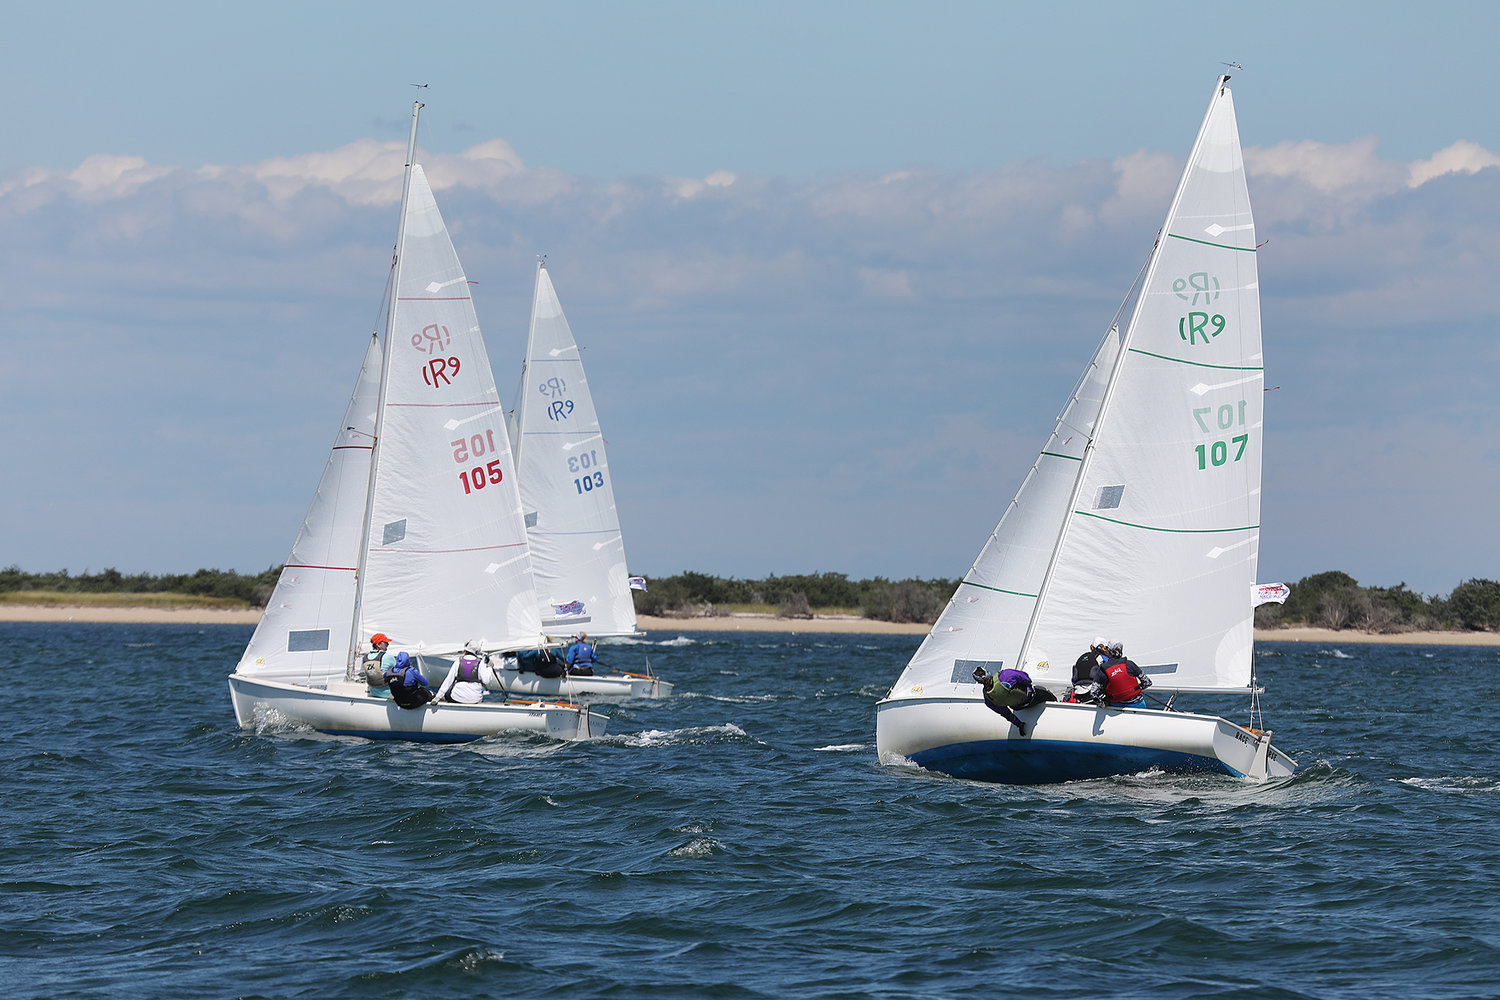 Boats race during the Women's Regatta in the harbor on Thursday.